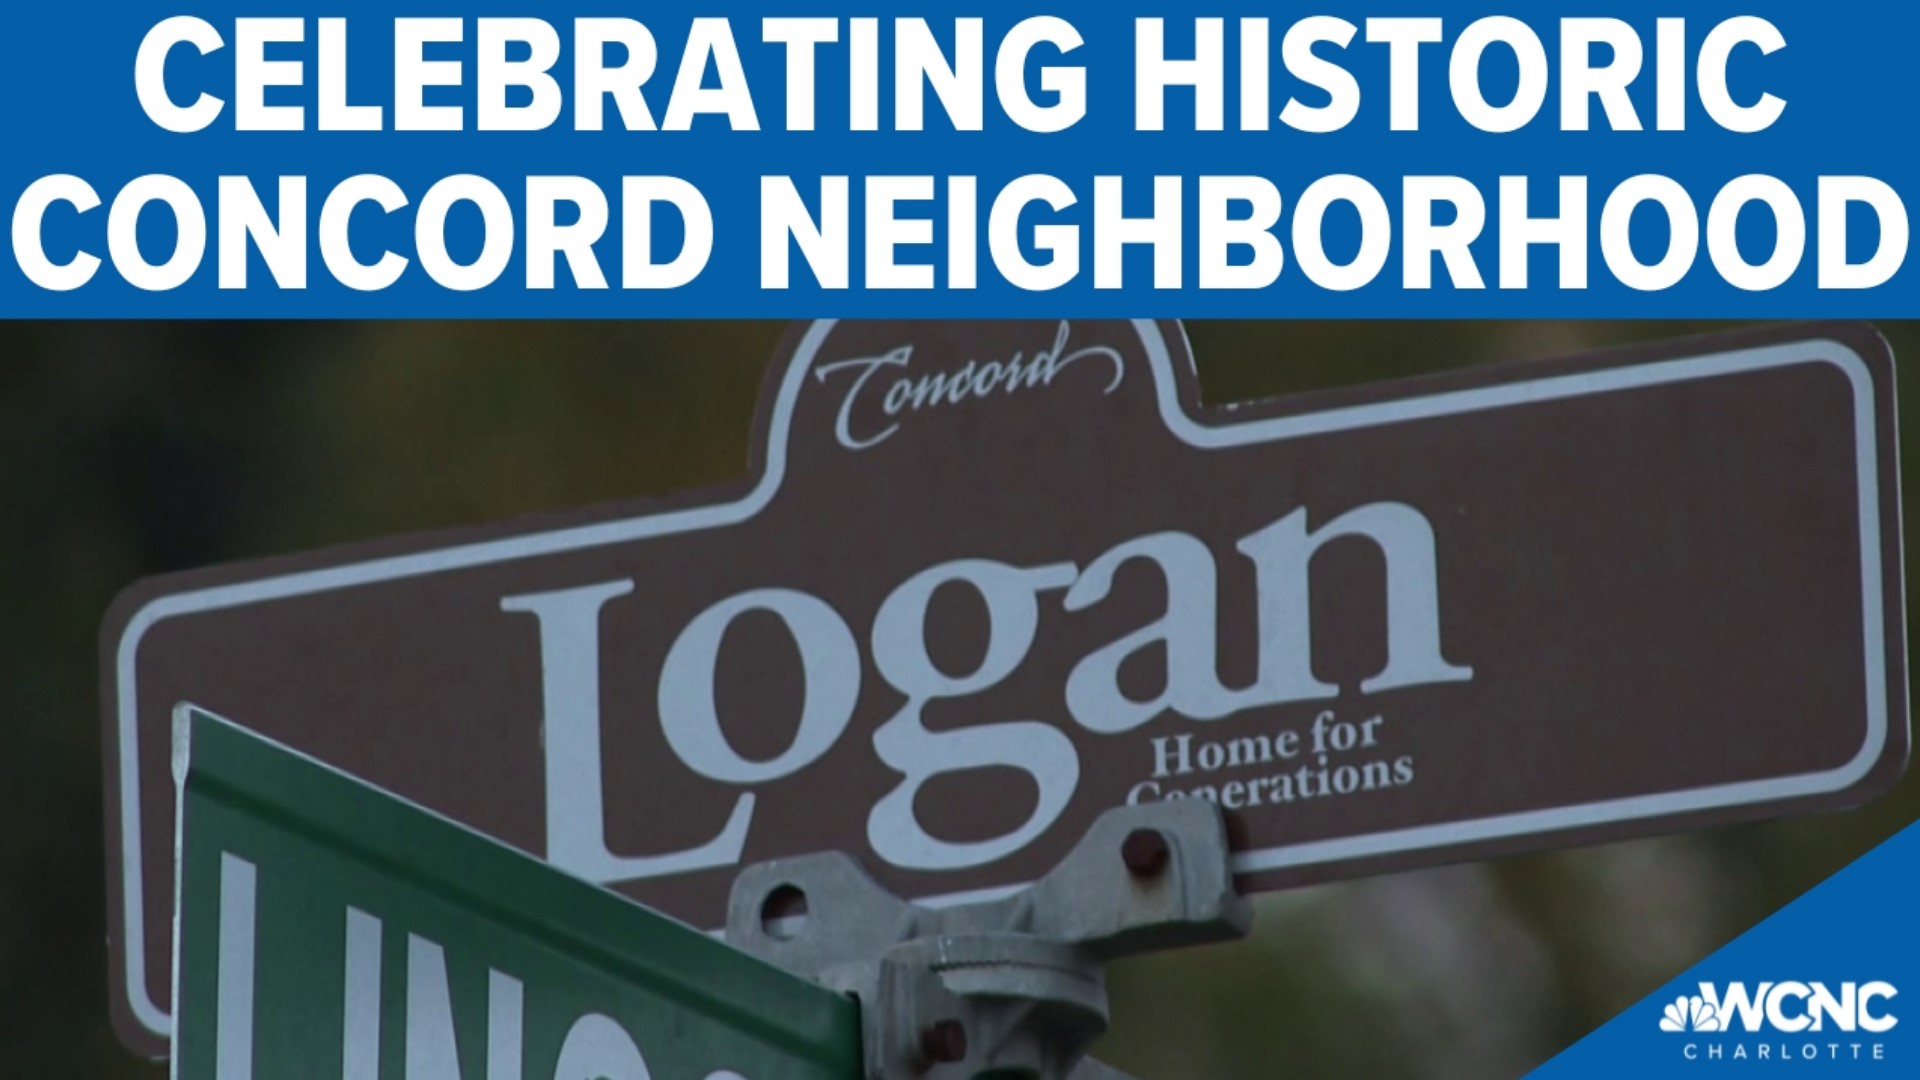 City officials want to celebrate the diverse history with the hope of submitting the neighborhood to become a part of the National Register of Historic Places.